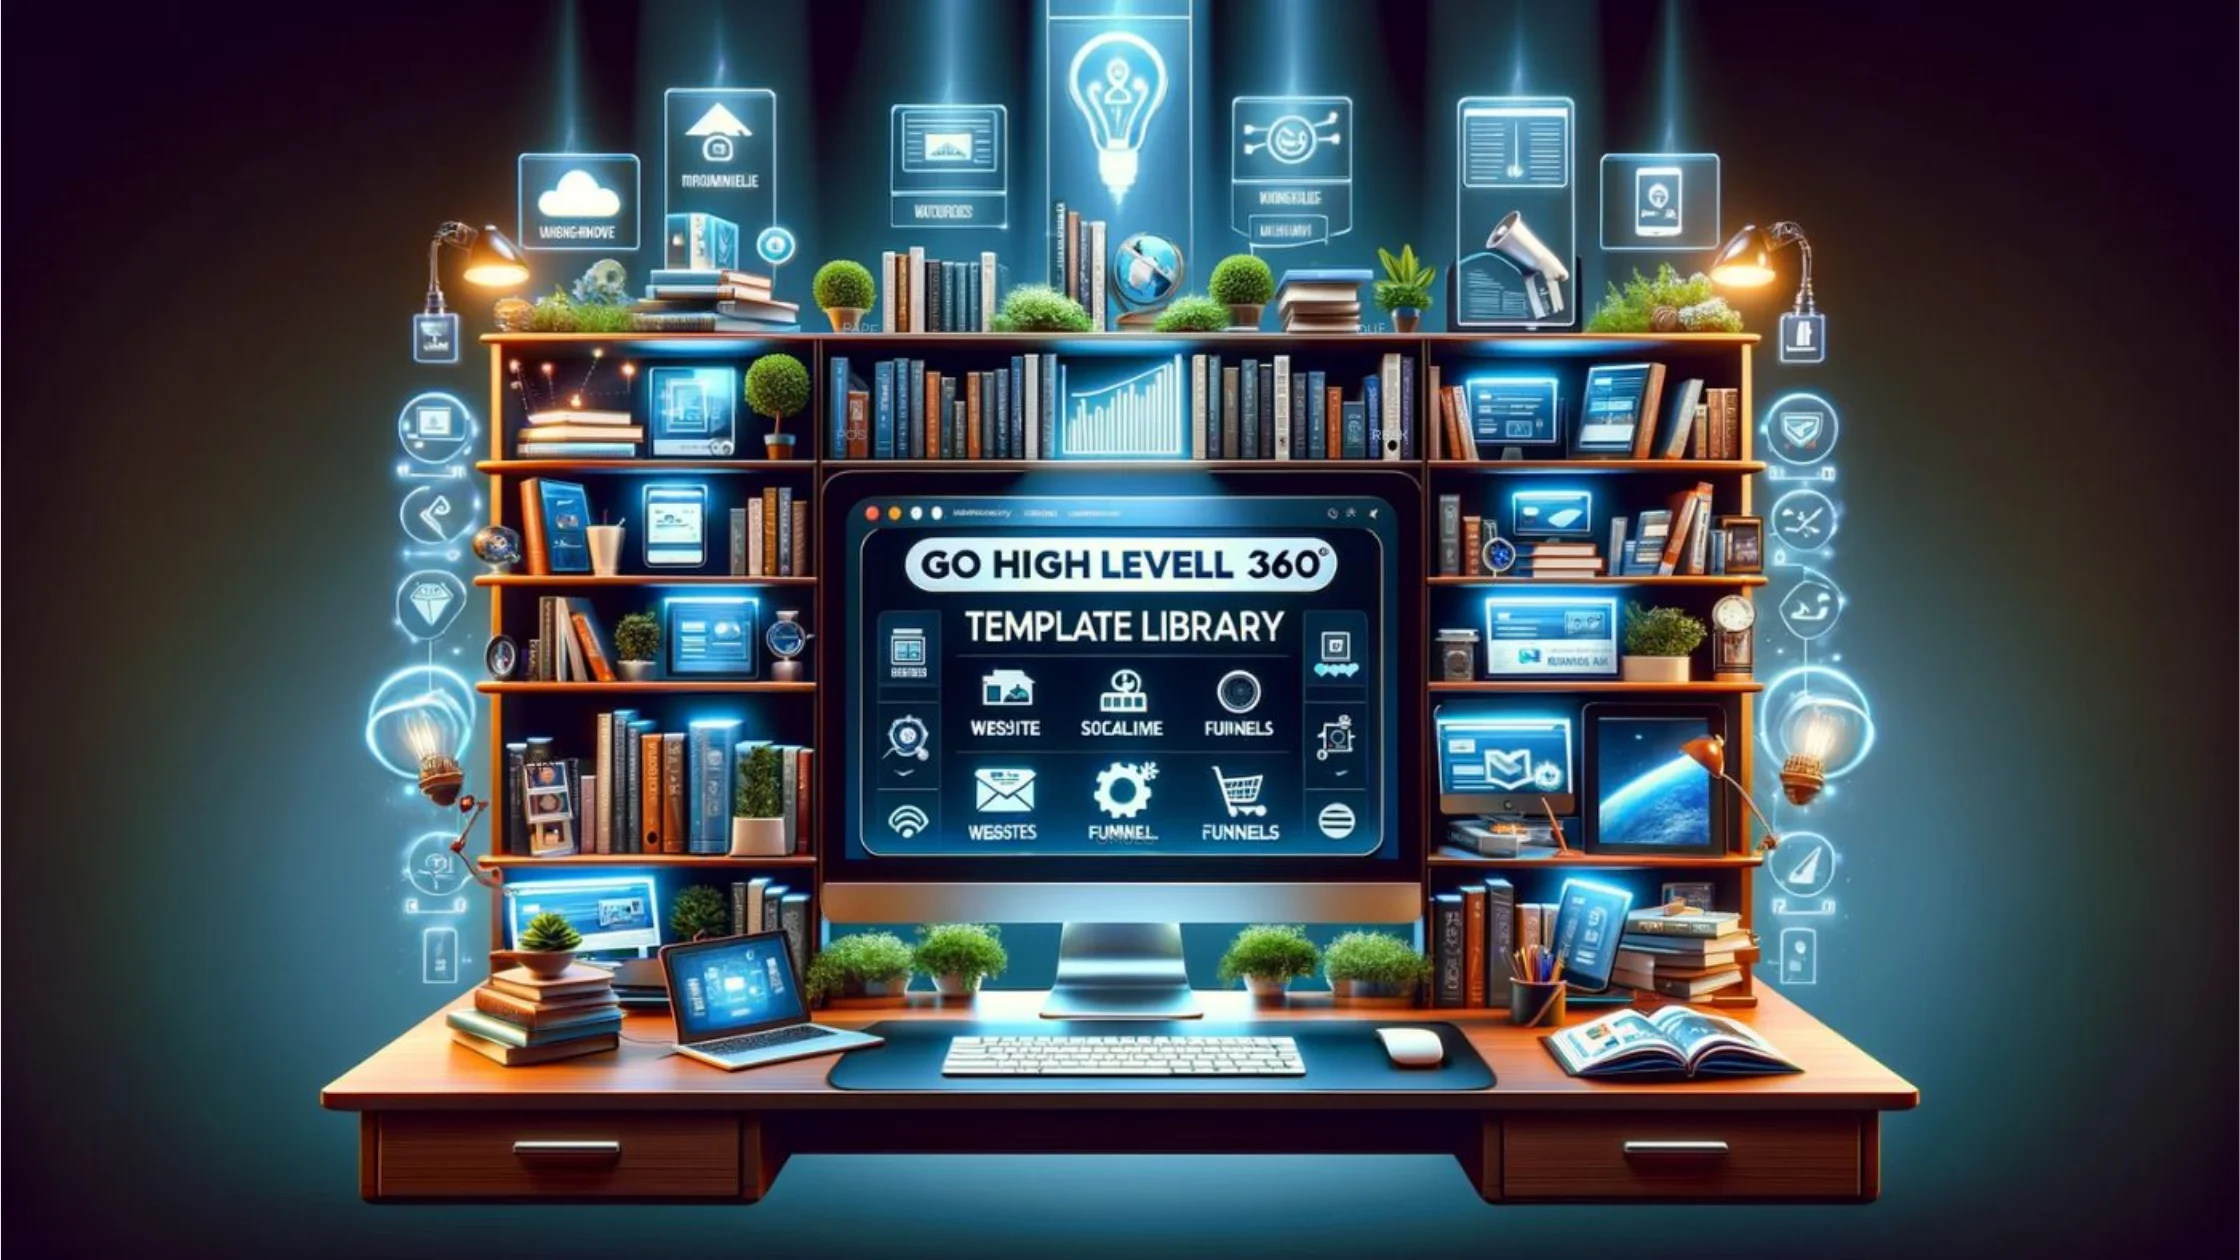 AI IMAGE OF A COMPUTER DESK WITH UNLIMITED ACCESS TO A MASSIVE DIGITAL ASSET TEMPLATE LIBRARY